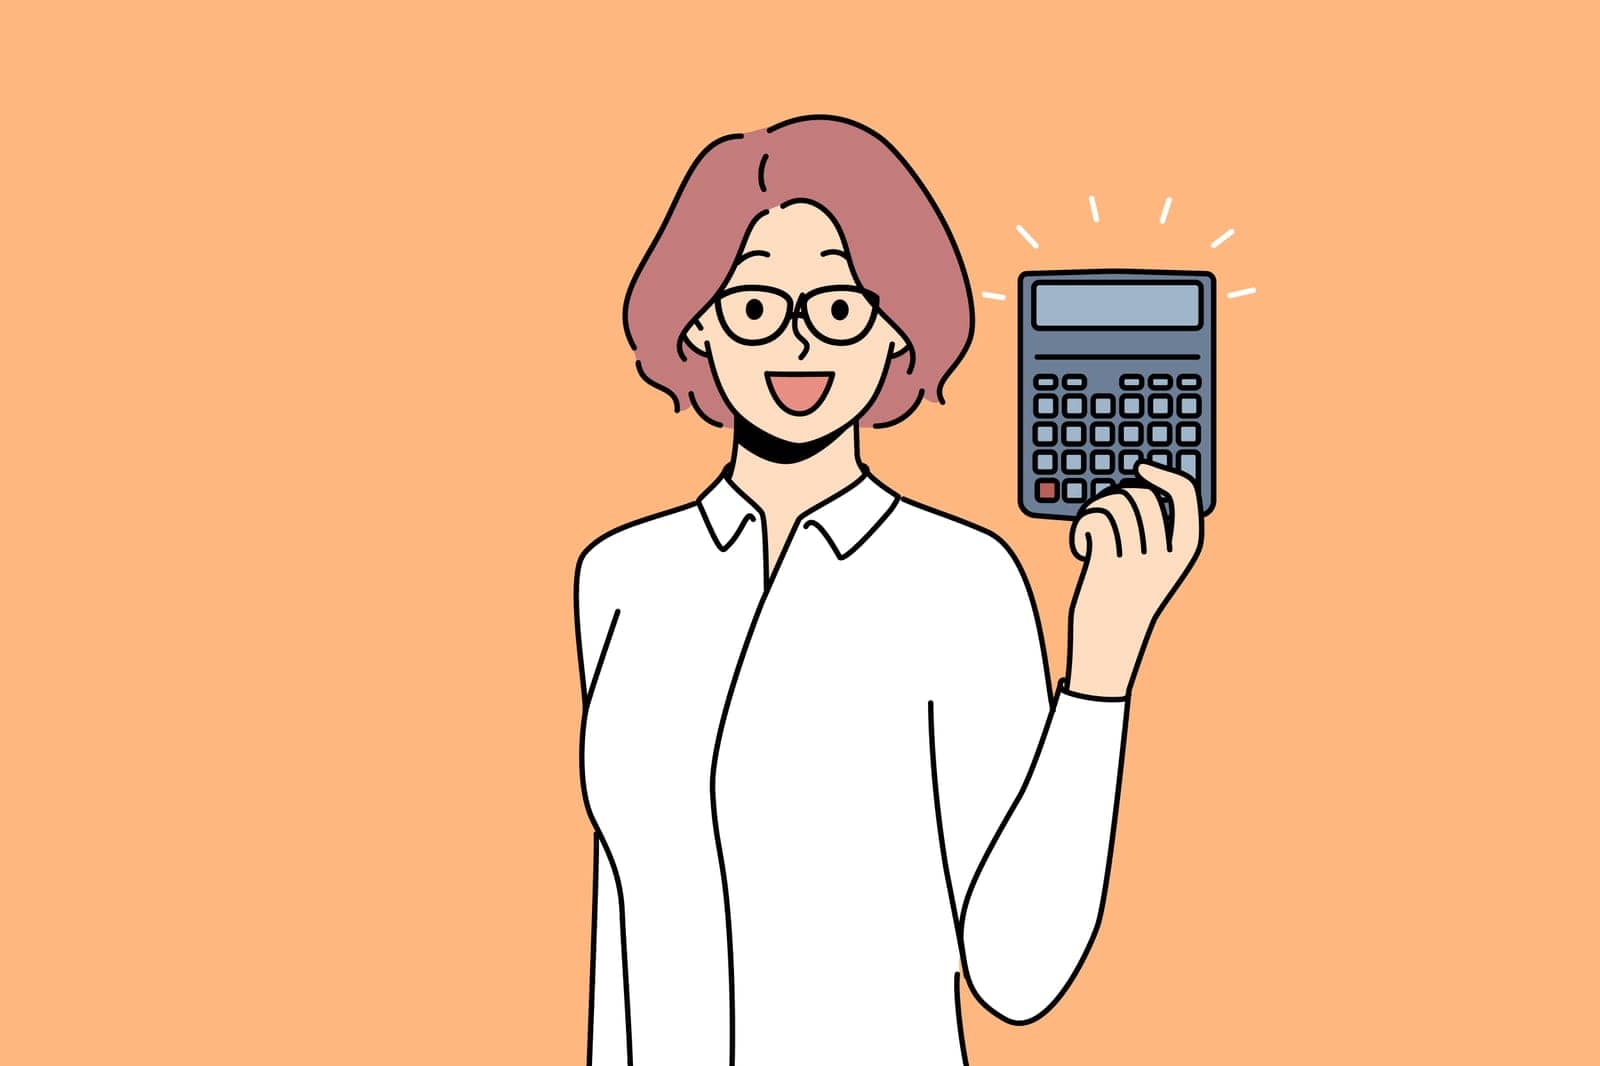 Woman accountant with calculator for calculating tax on company profits. Businesswoman or professional auditor recommends using calculator to avoid errors in corporation balance sheet.